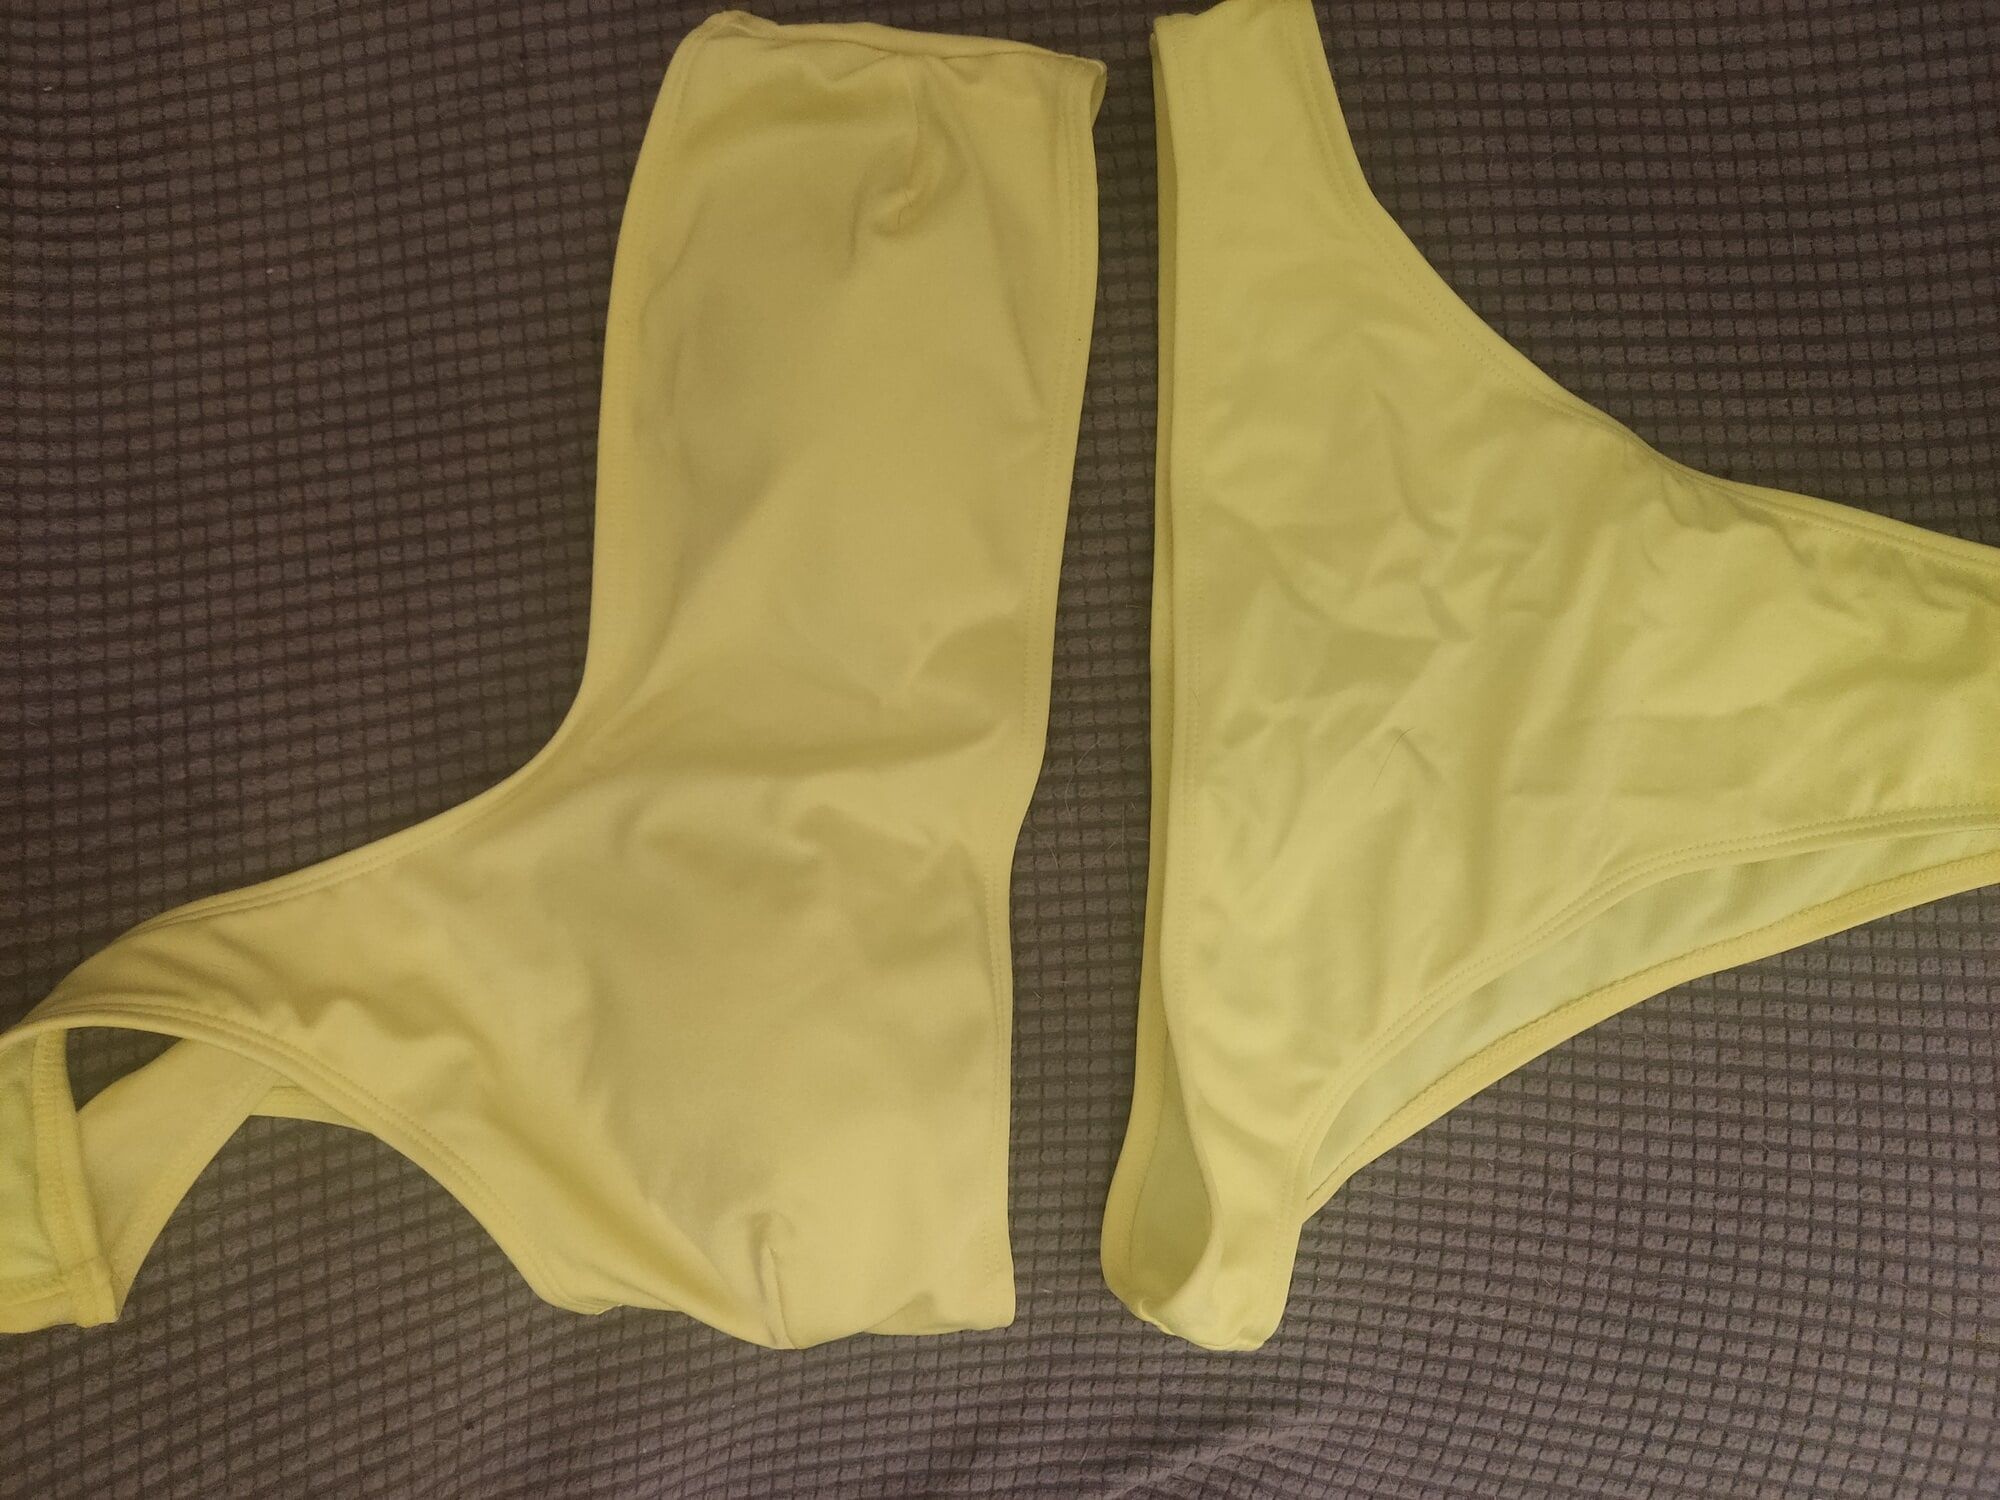 PANTIES AND USED WOMAN CLOTHES FOR SALE #6